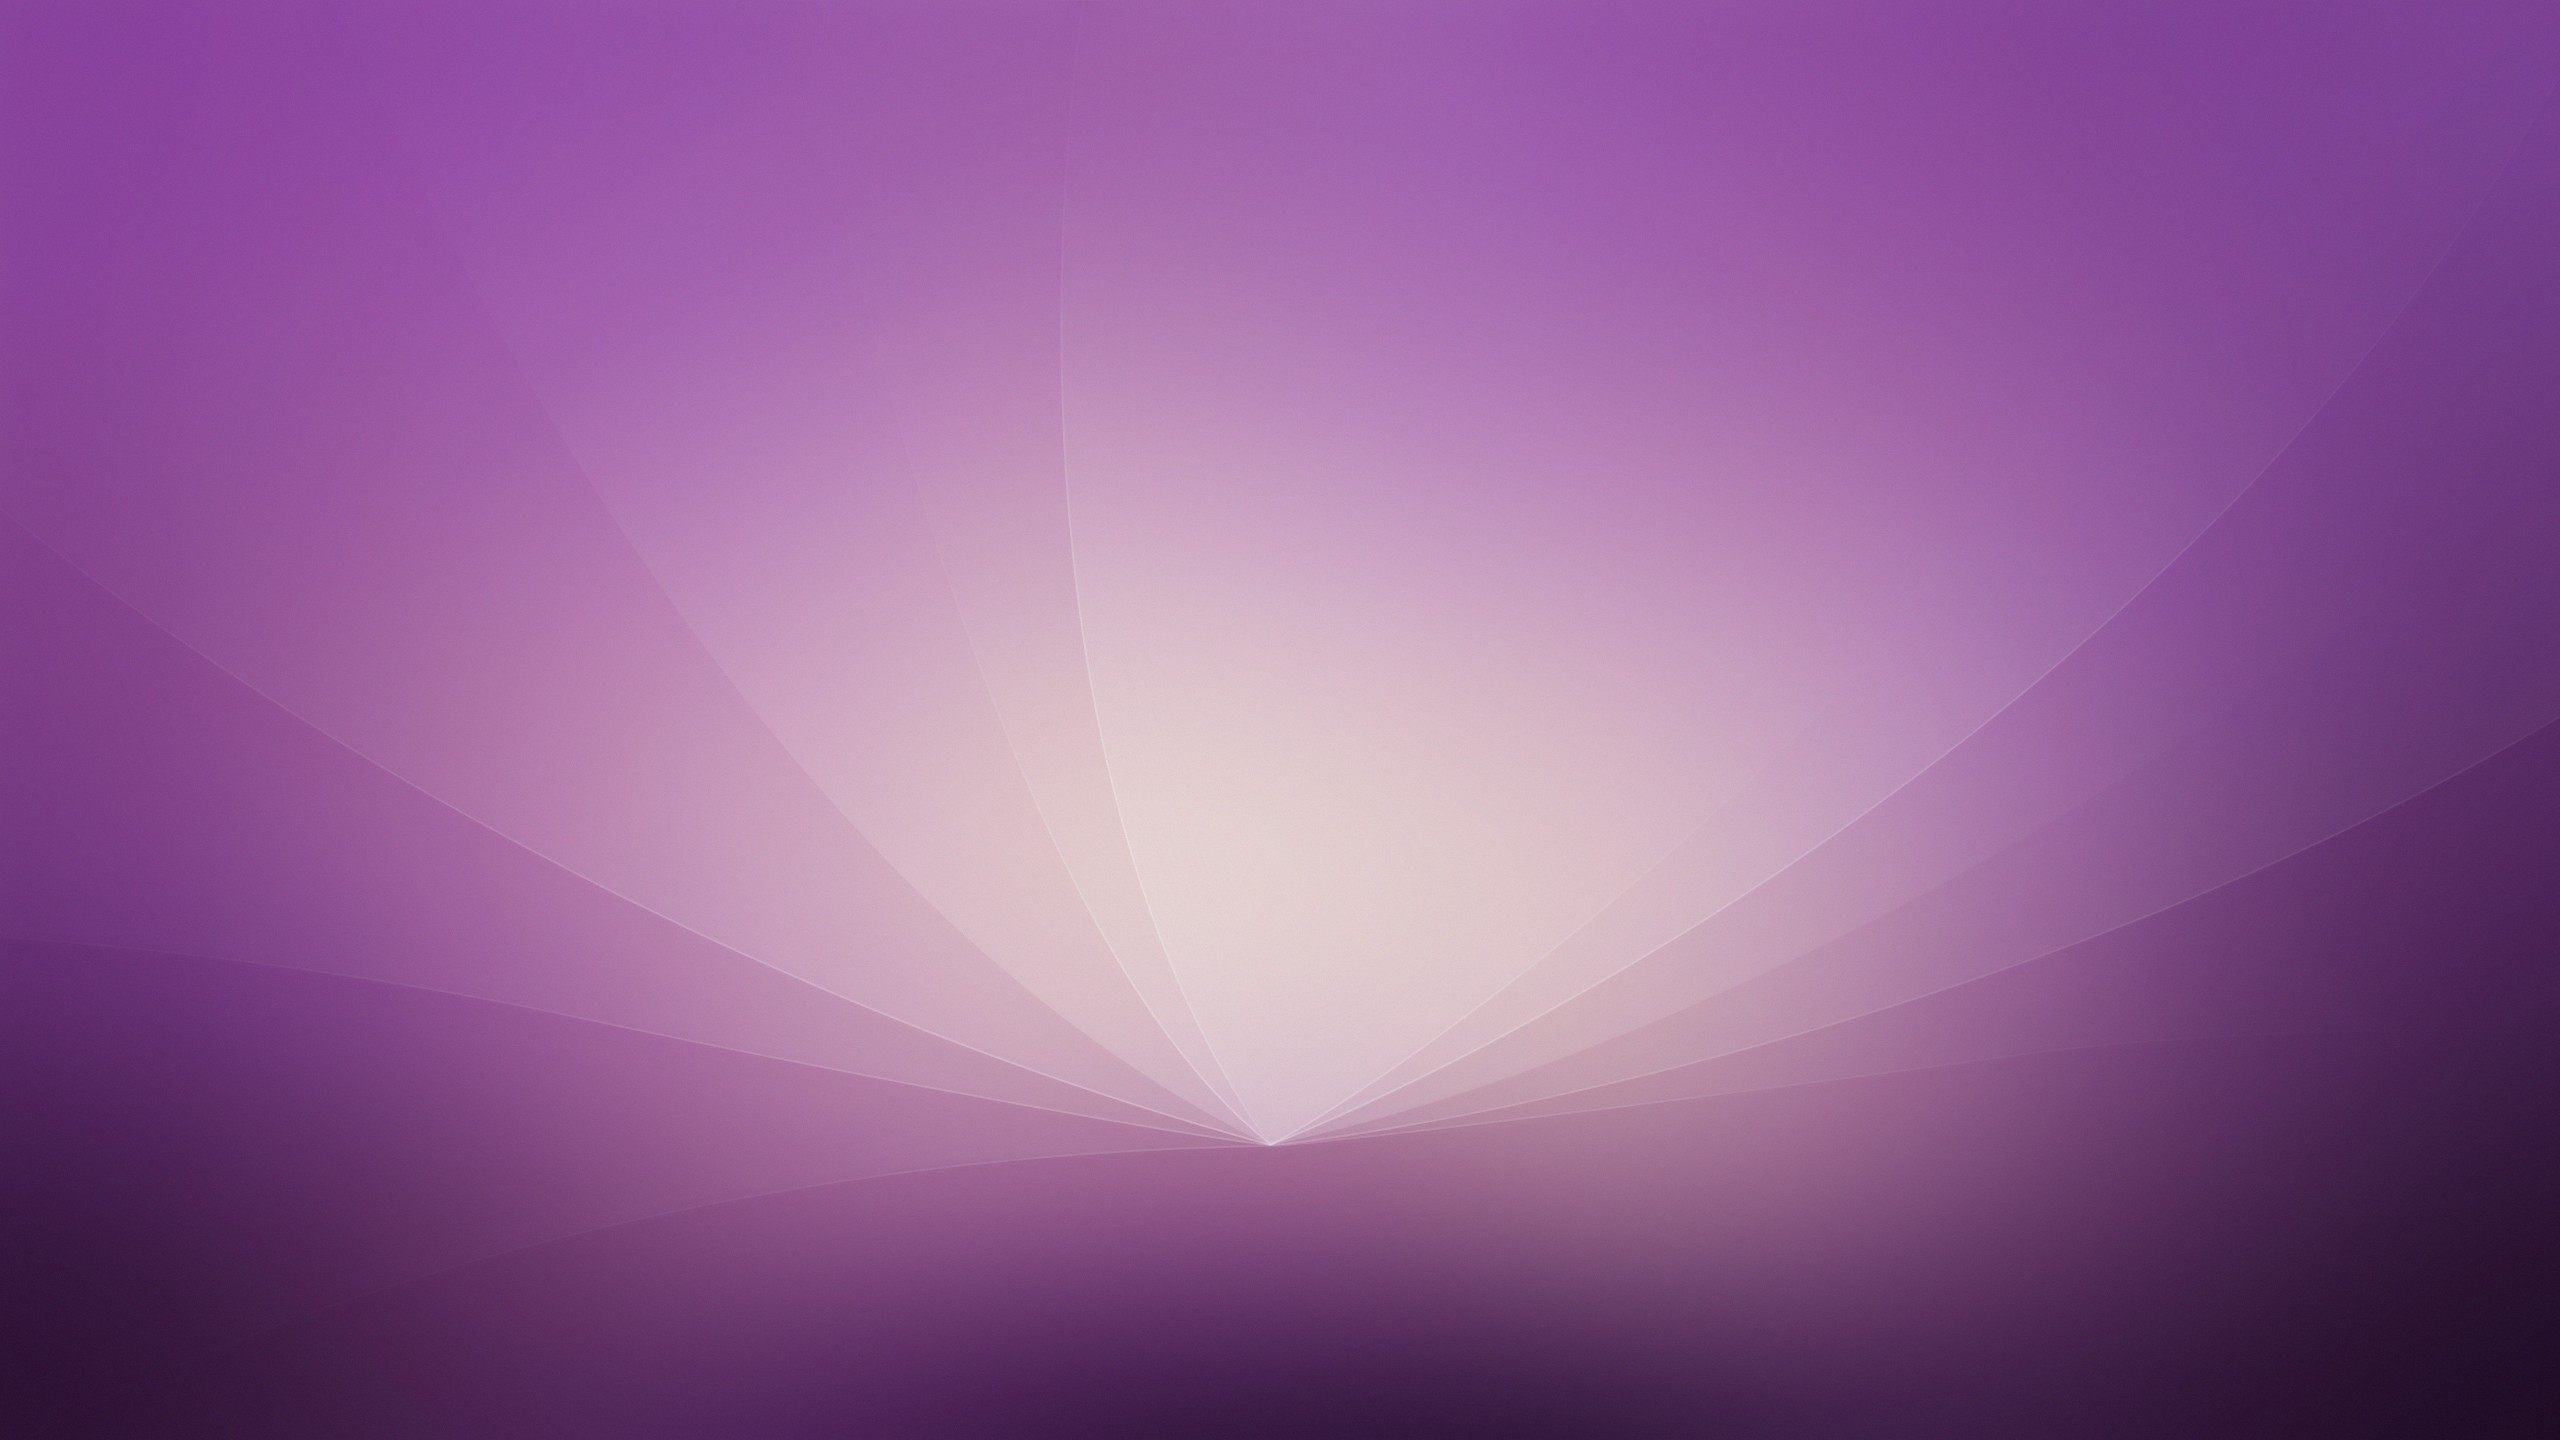 General 2560x1440 simple background minimalism abstract violet digital art texture purple background